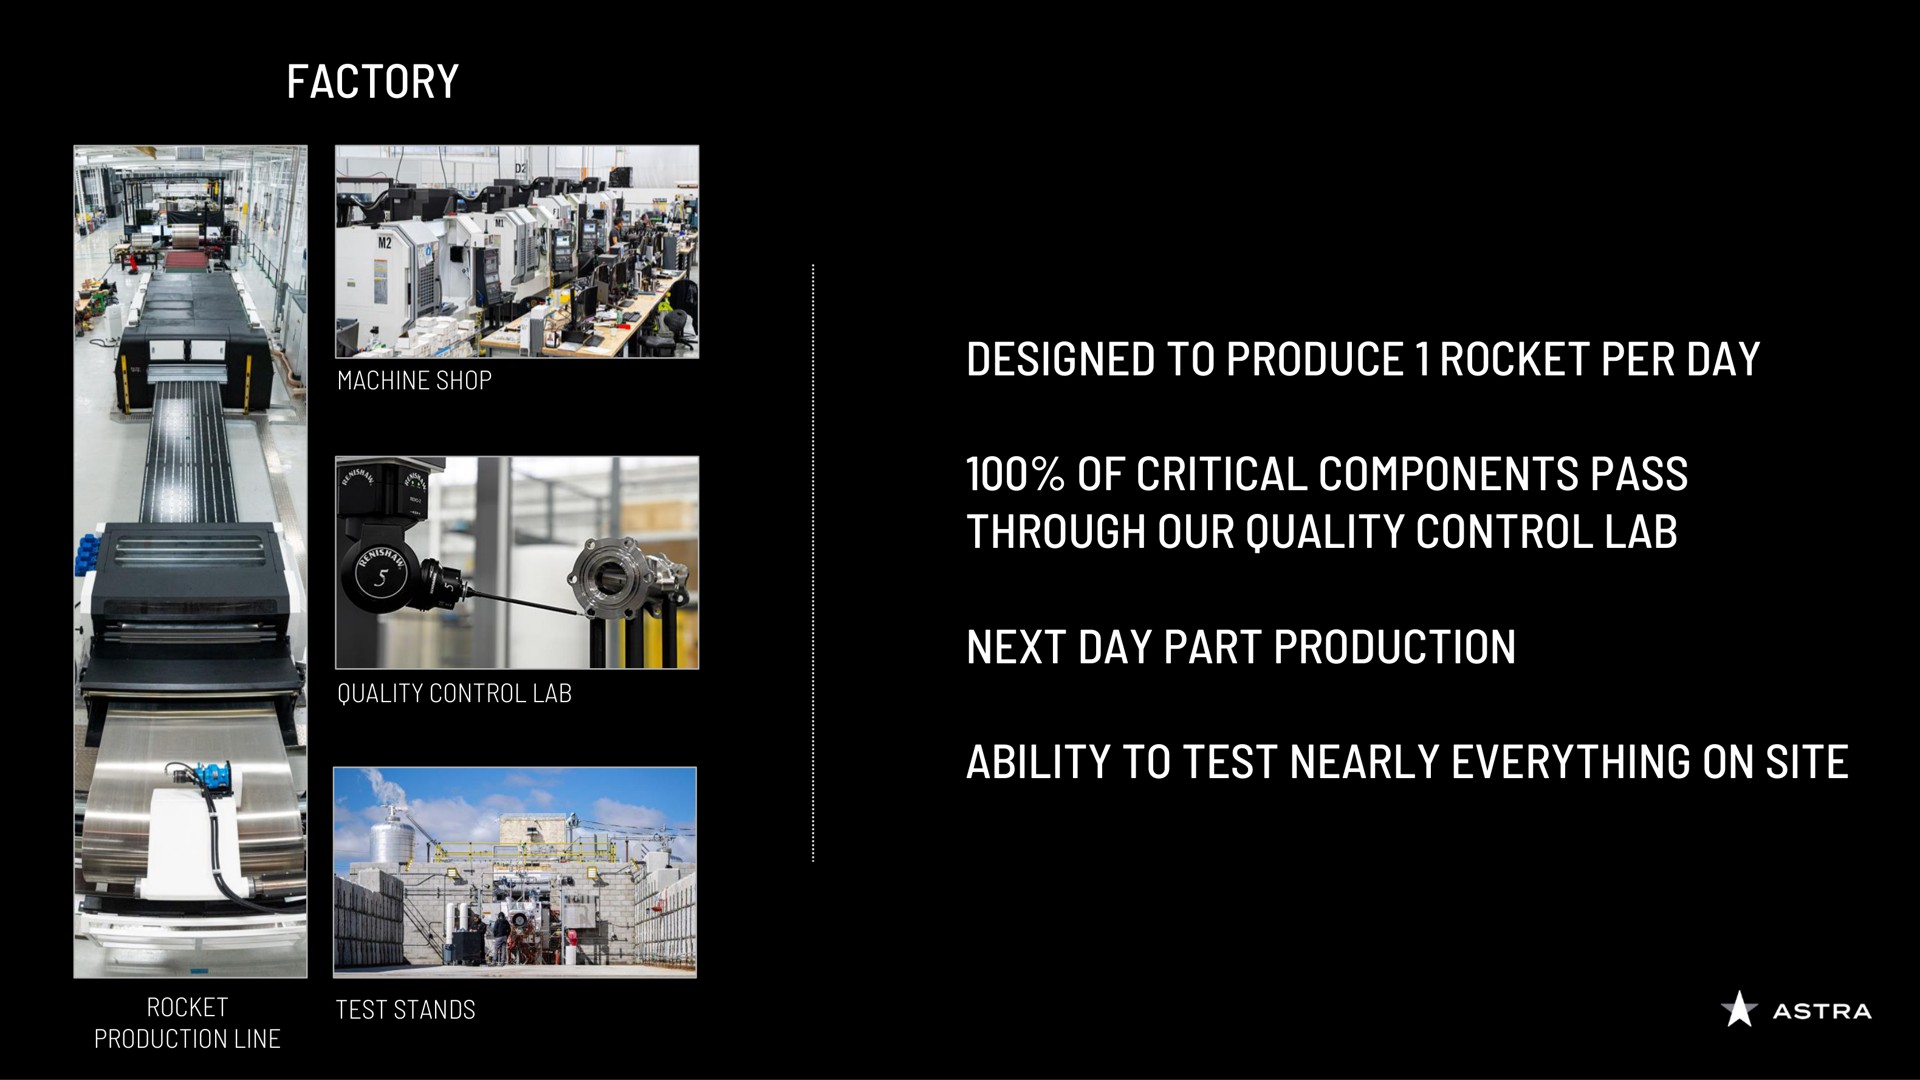 factory designed to produce rocket per day of critical components pass through our quality control lab next day part production ability to test nearly everything on site | Astra